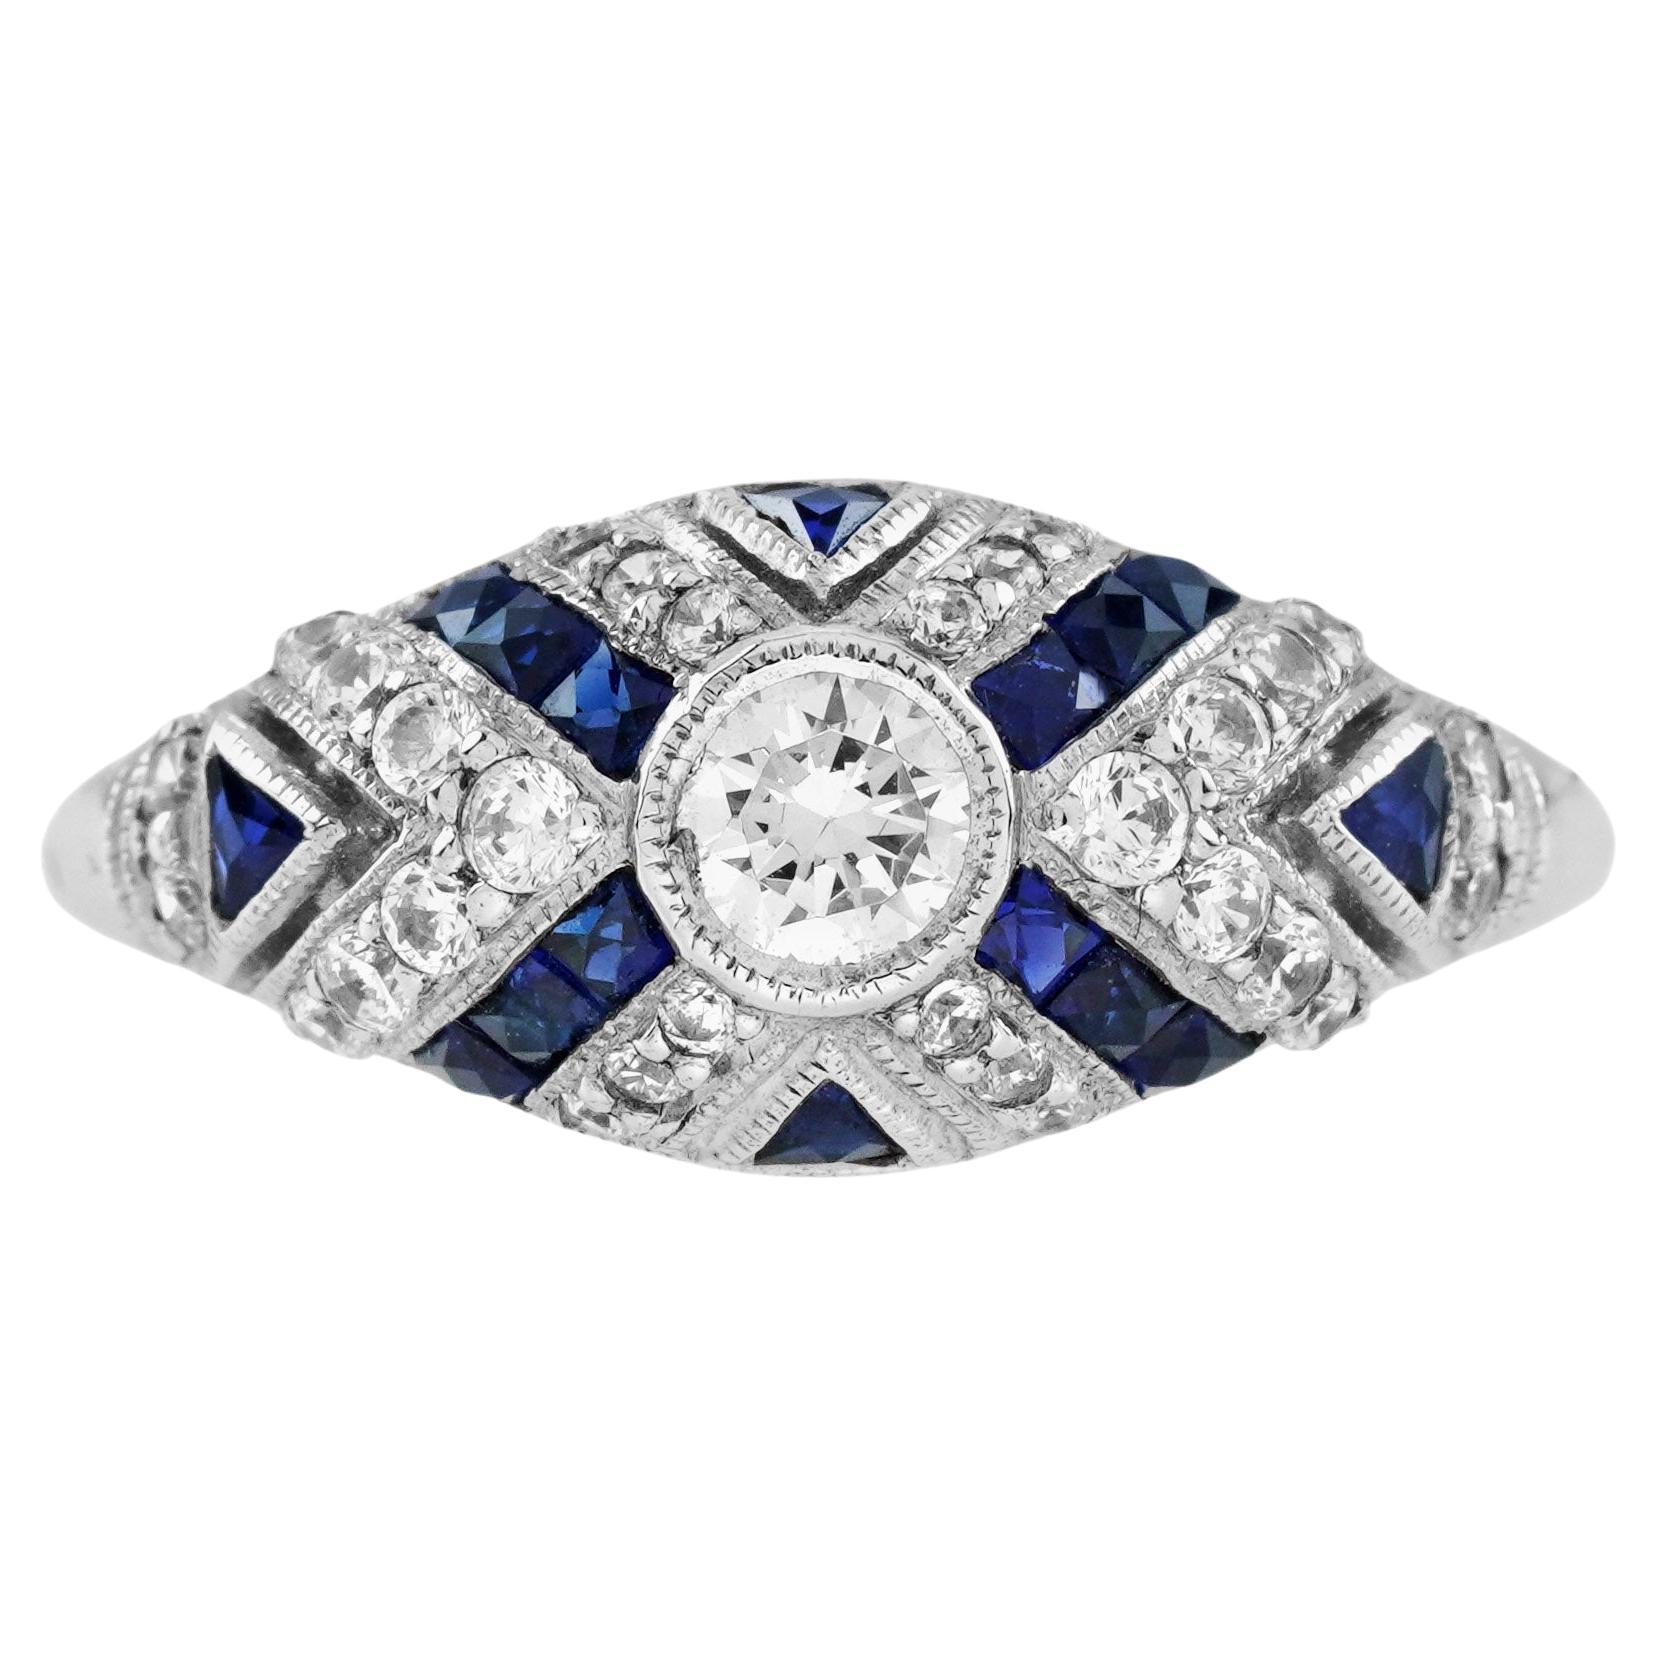 Diamond and Blue Sapphire Art Deco Style Engagement Ring in 18K White Gold For Sale